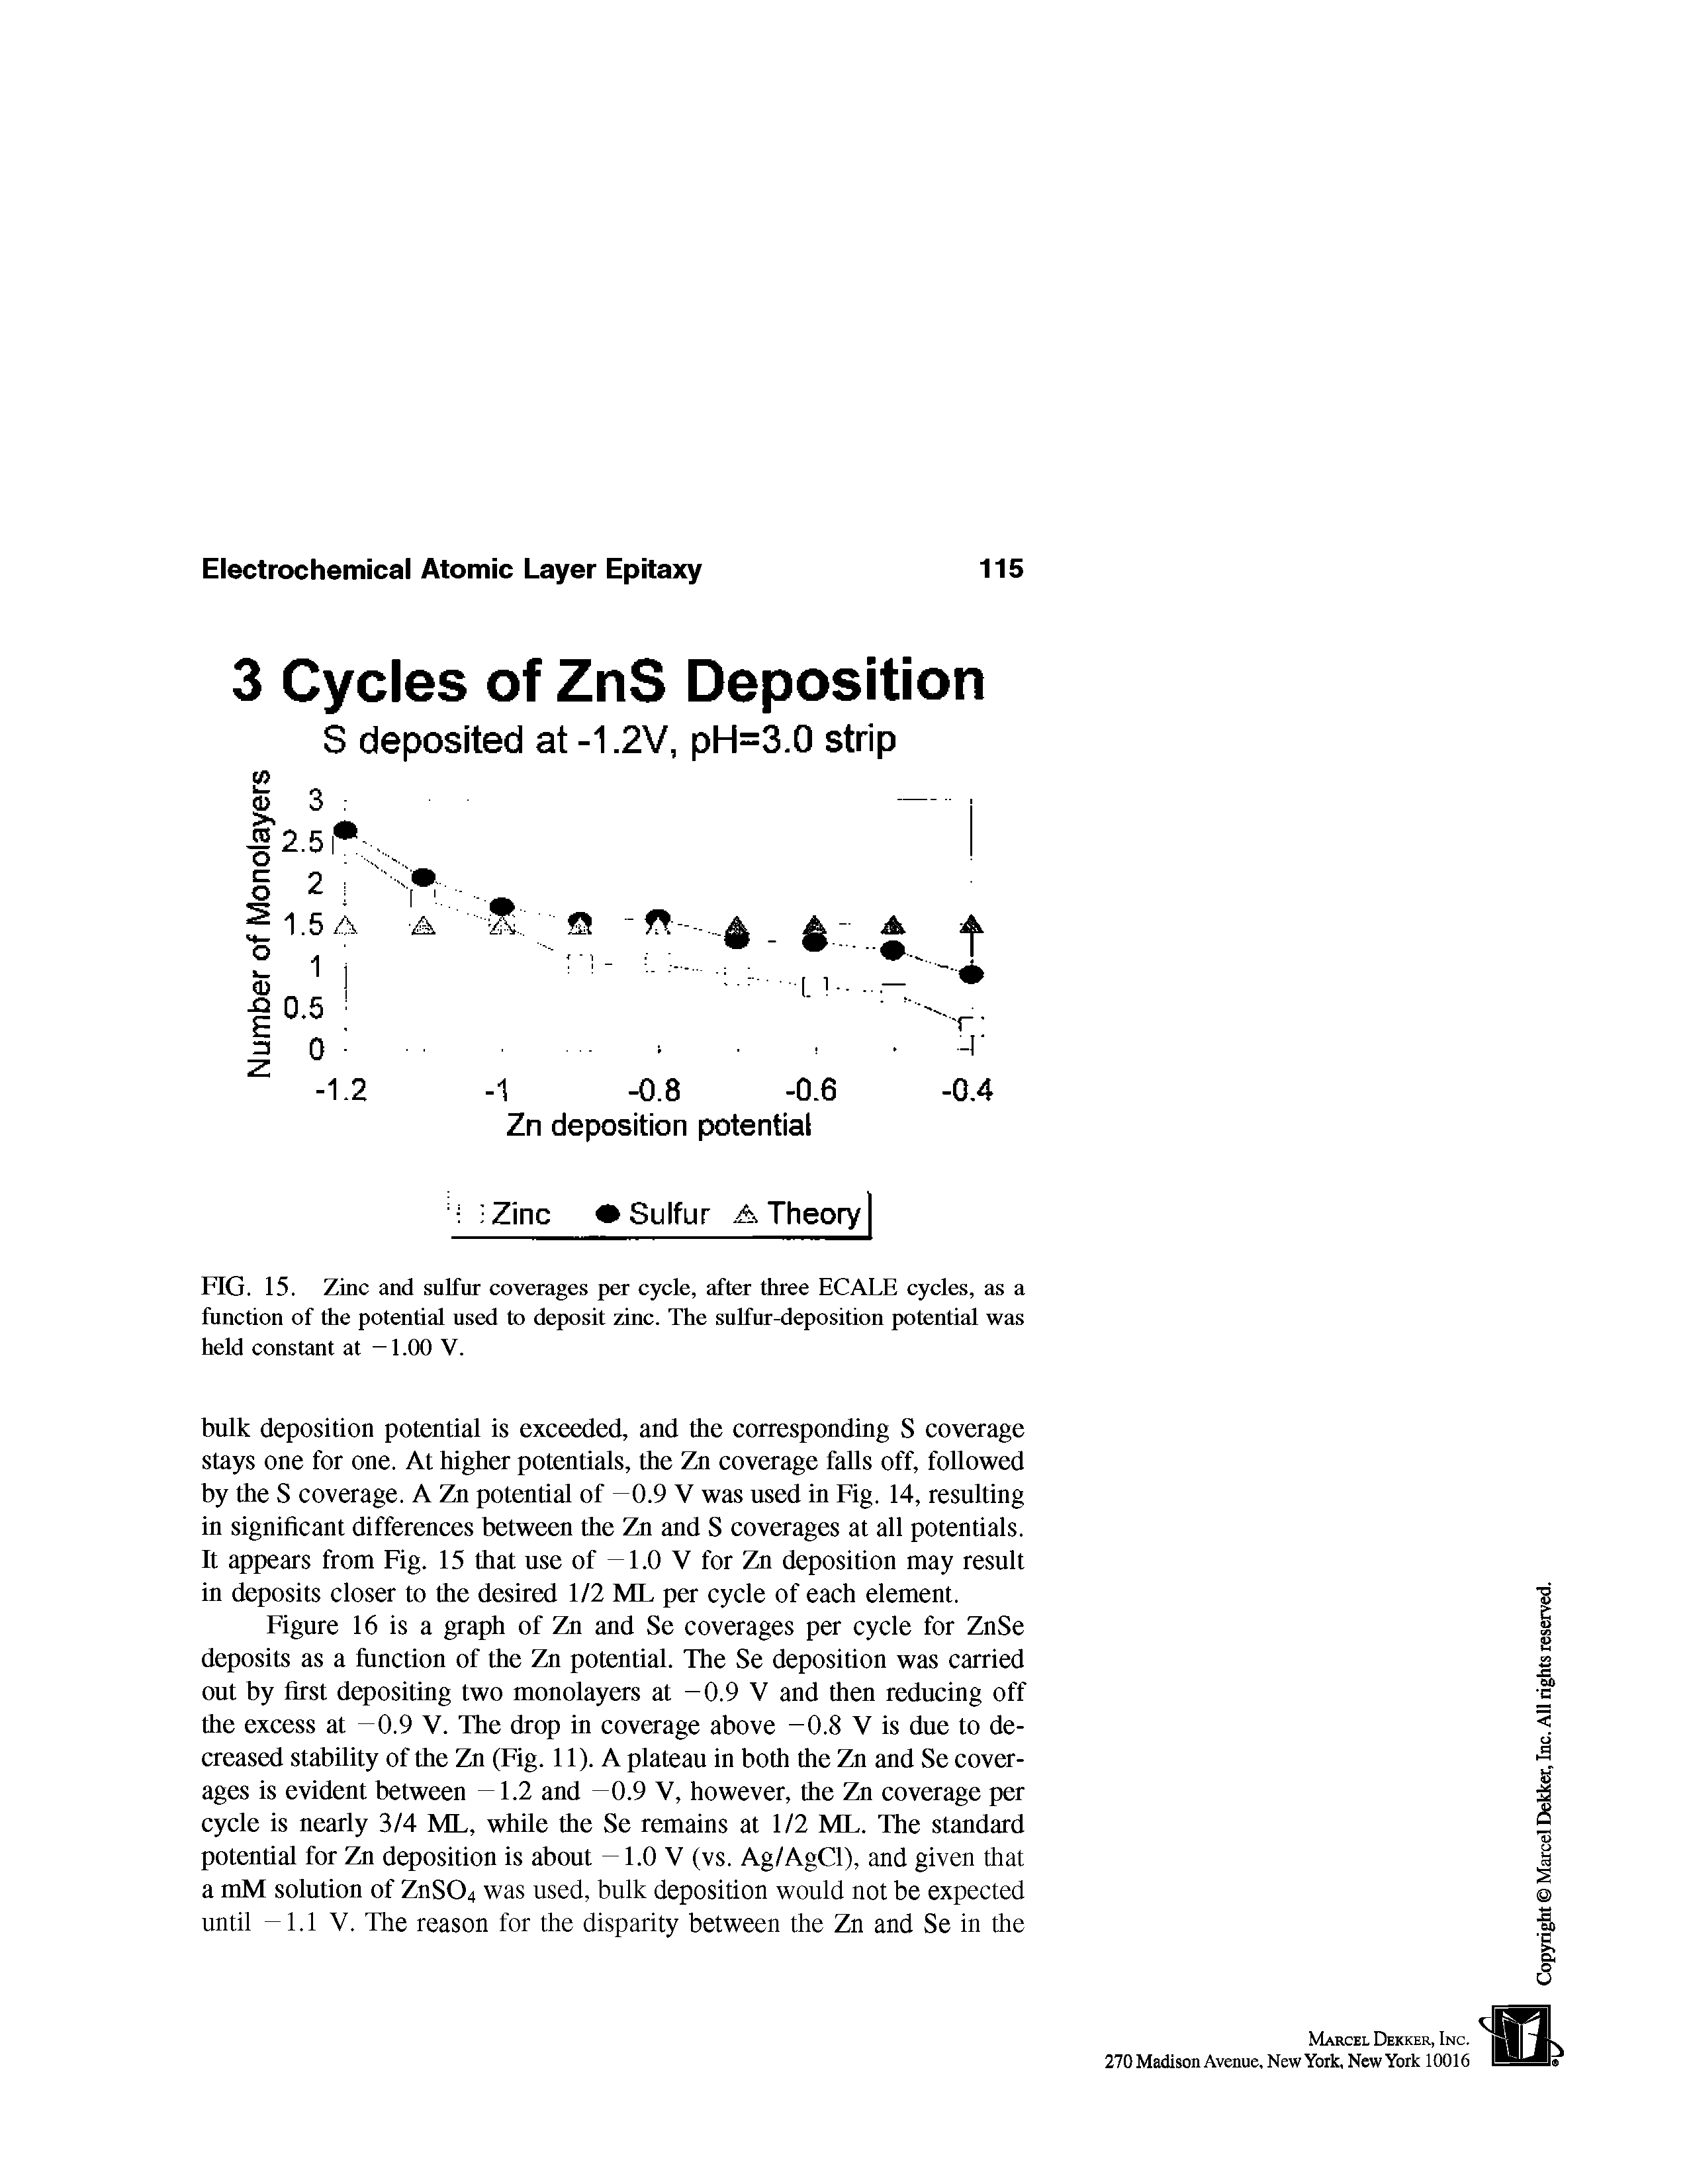 Figure 16 is a graph of Zn and Se coverages per cycle for ZnSe deposits as a function of the Zn potential. The Se deposition was carried out by first depositing two monolayers at -0.9 V and then reducing off the excess at -0.9 V. The drop in coverage above -0.8 V is due to decreased stability of the Zn (Fig. 11). A plateau in both the Zn and Se coverages is evident between -1.2 and -0.9 V, however, the Zn coverage per cycle is nearly 3/4 ML, while the Se remains at 1/2 ML. The standard potential for Zn deposition is about -1.0 V (vs. Ag/AgCl), and given that a mM solution of ZnS04 was used, bulk deposition would not be expected until -1.1 V. The reason for the disparity between the Zn and Se in the...